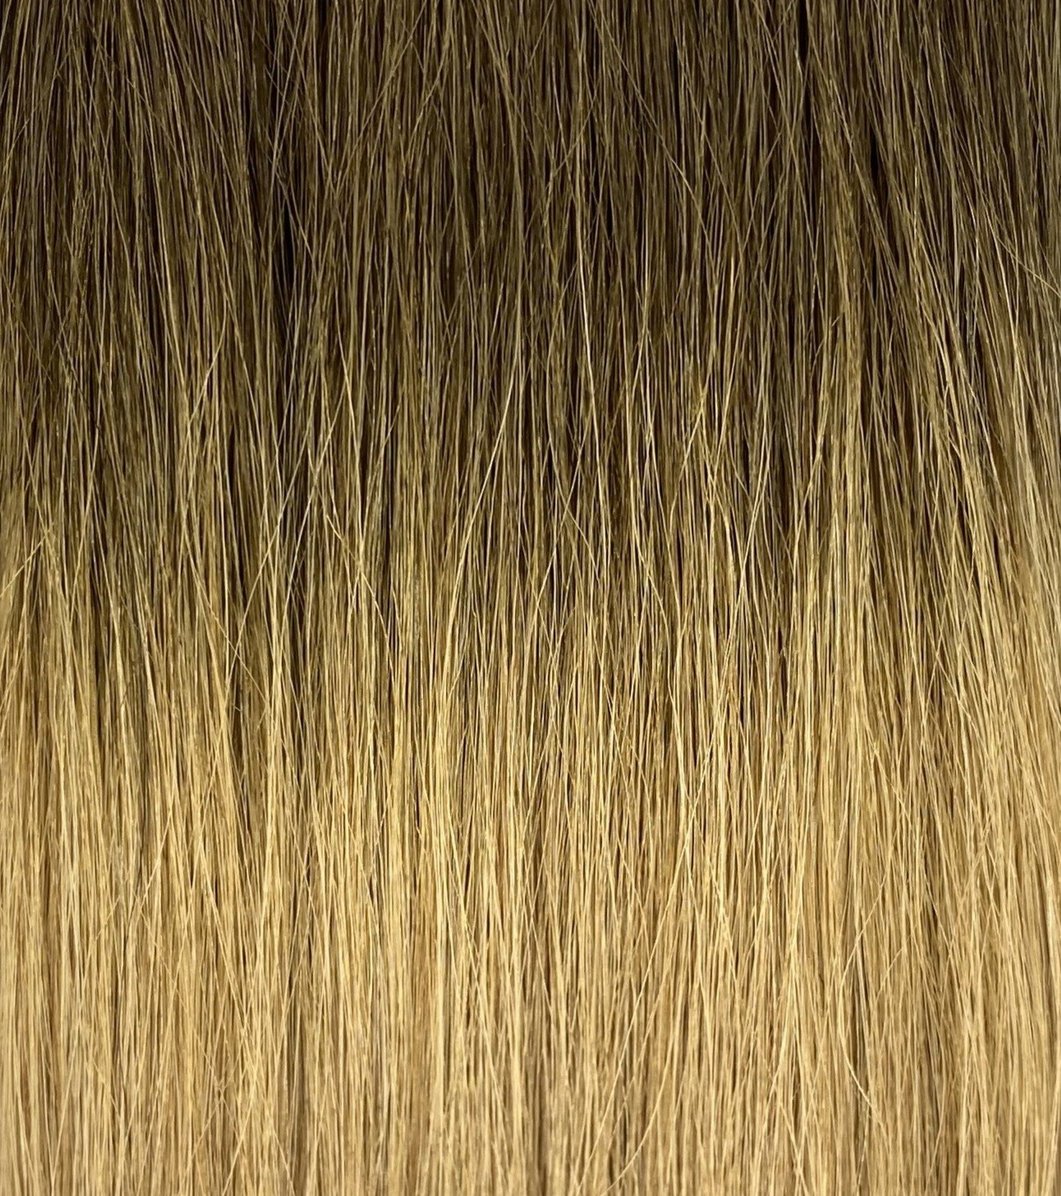 Double Weft Ombre #4 &14 - Double - 24 Inches - Chestnut into Copper Golden Light Blonde - 70 Grams - Image 1